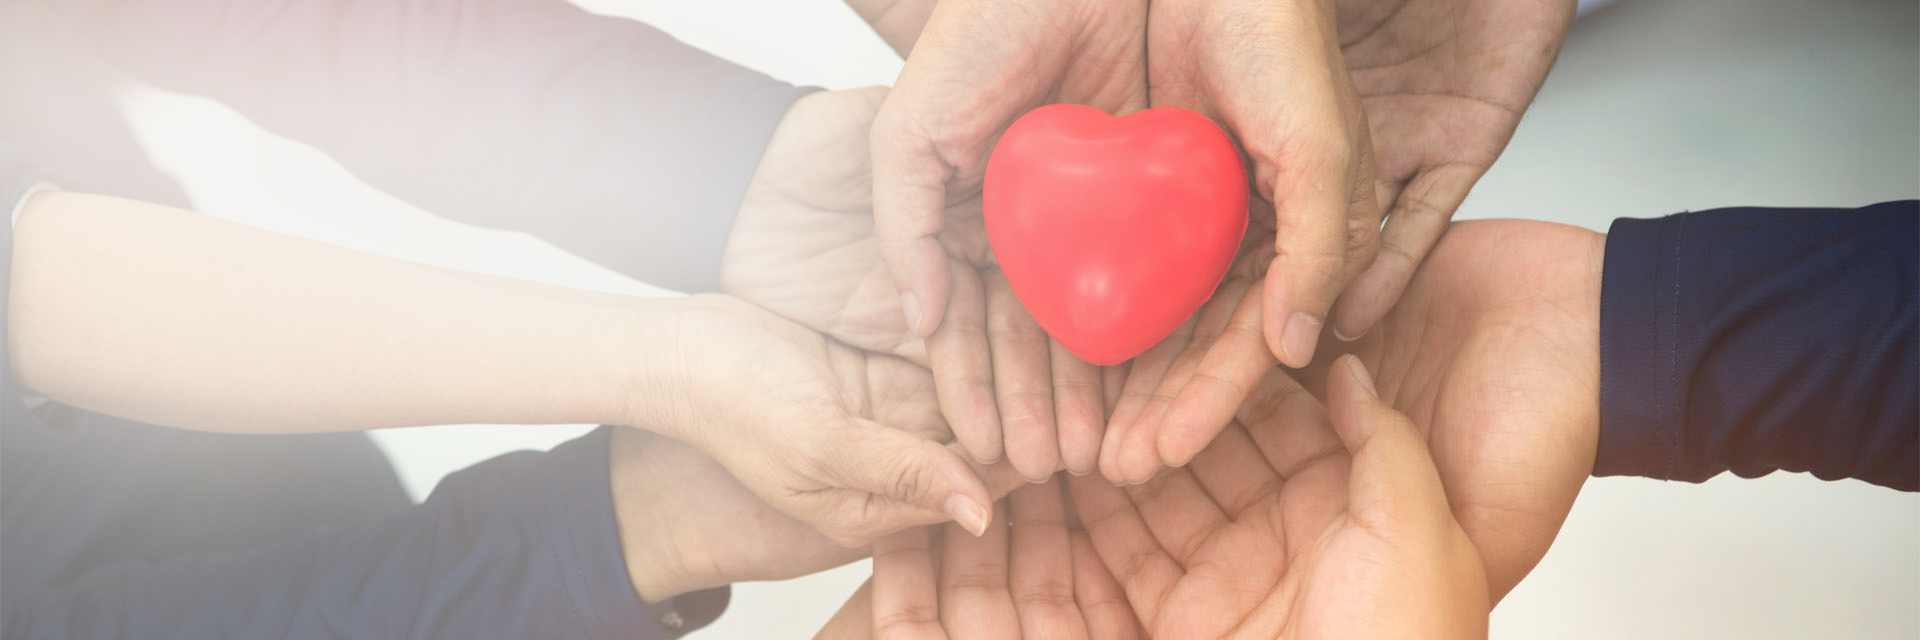 Image showing a close up of many hands holding a heart